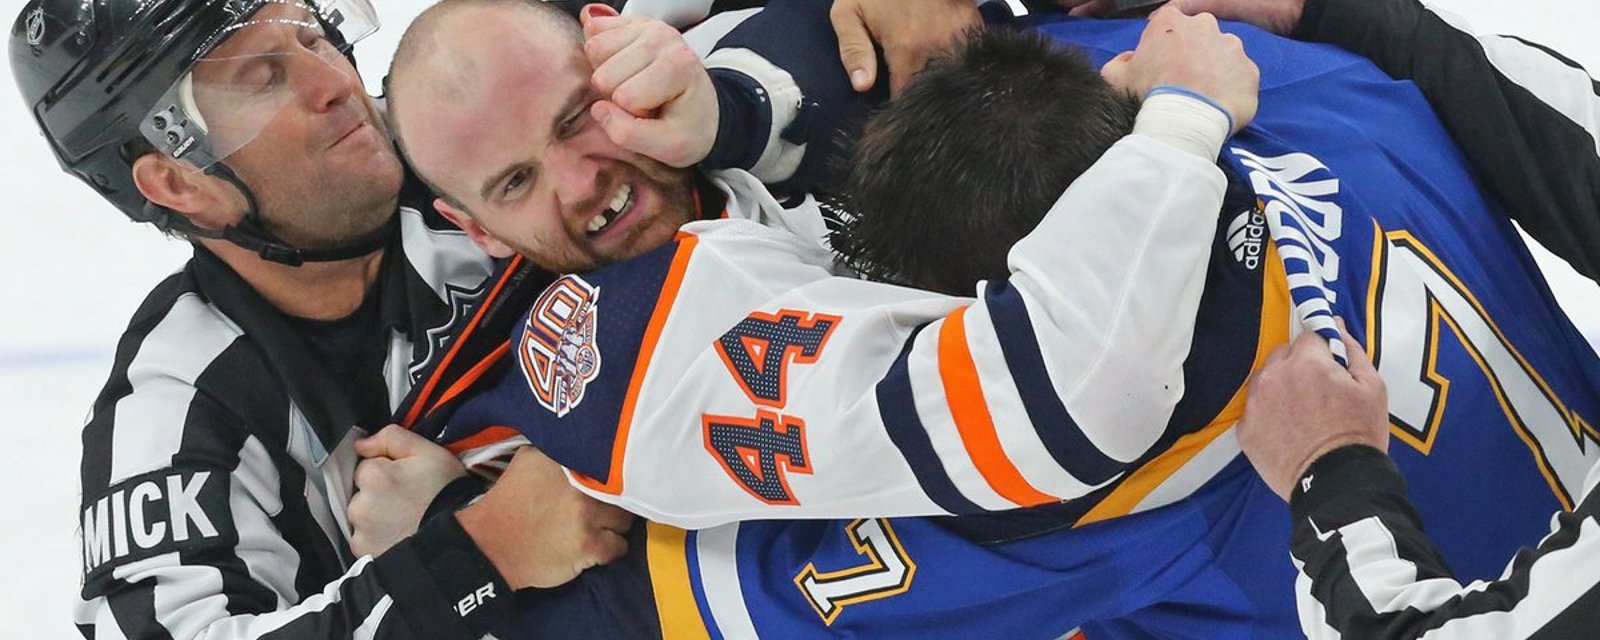 Former Oilers teammates get in spirited fight after spending the previous evening together! 